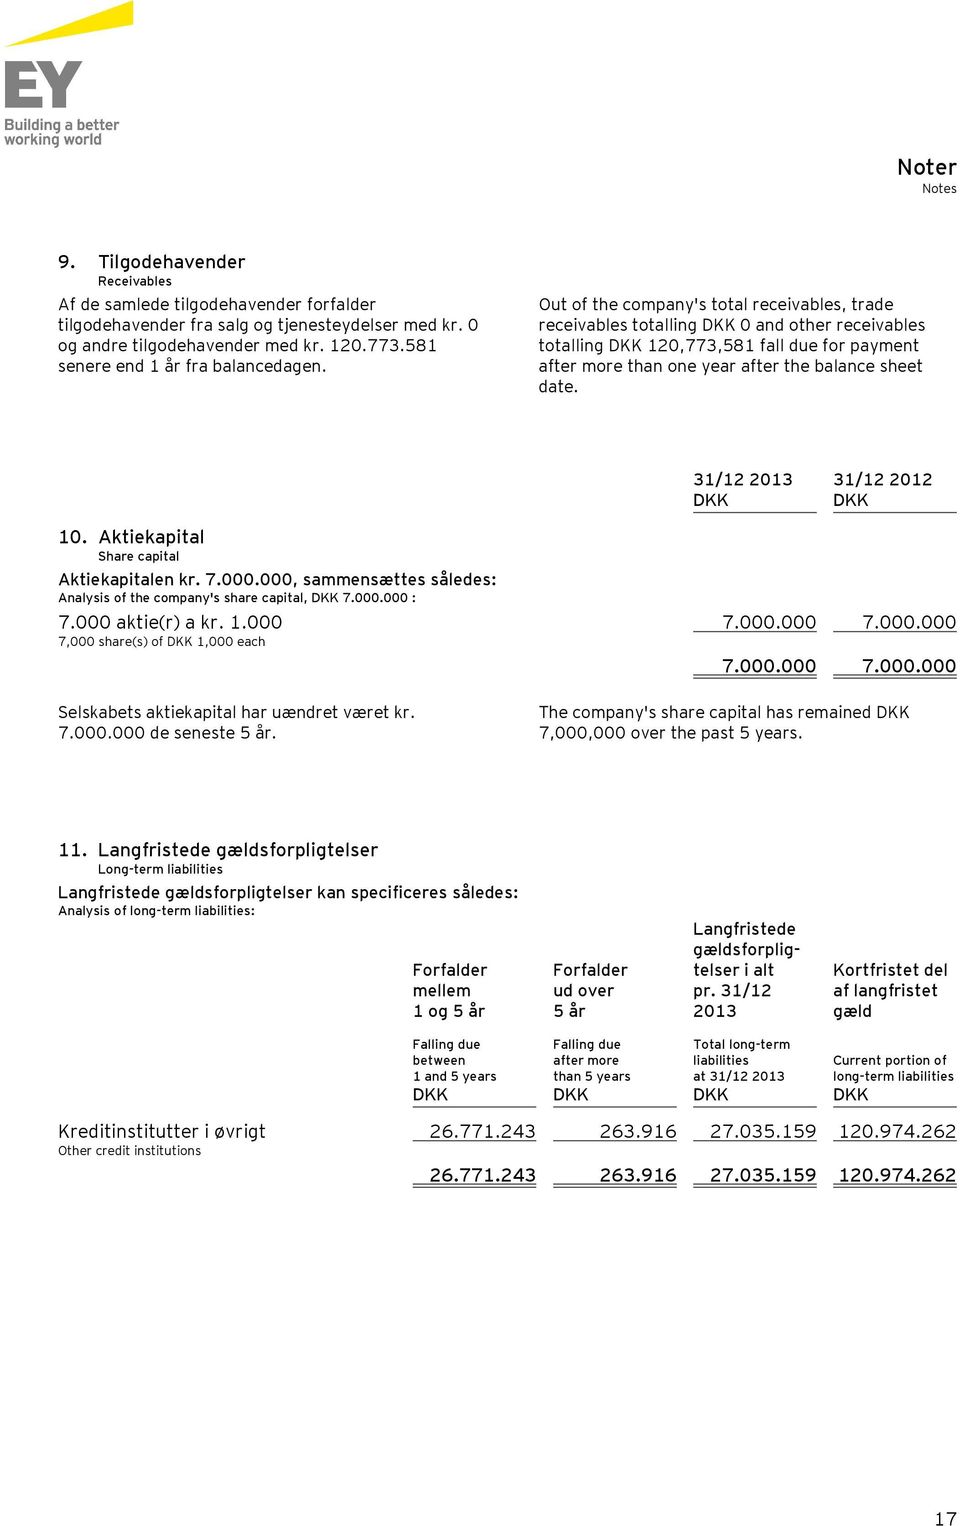 Out of the company's total receivables, trade receivables totalling 0 and other receivables totalling 120,773,581 fall due for payment after more than one year after the balance sheet date.